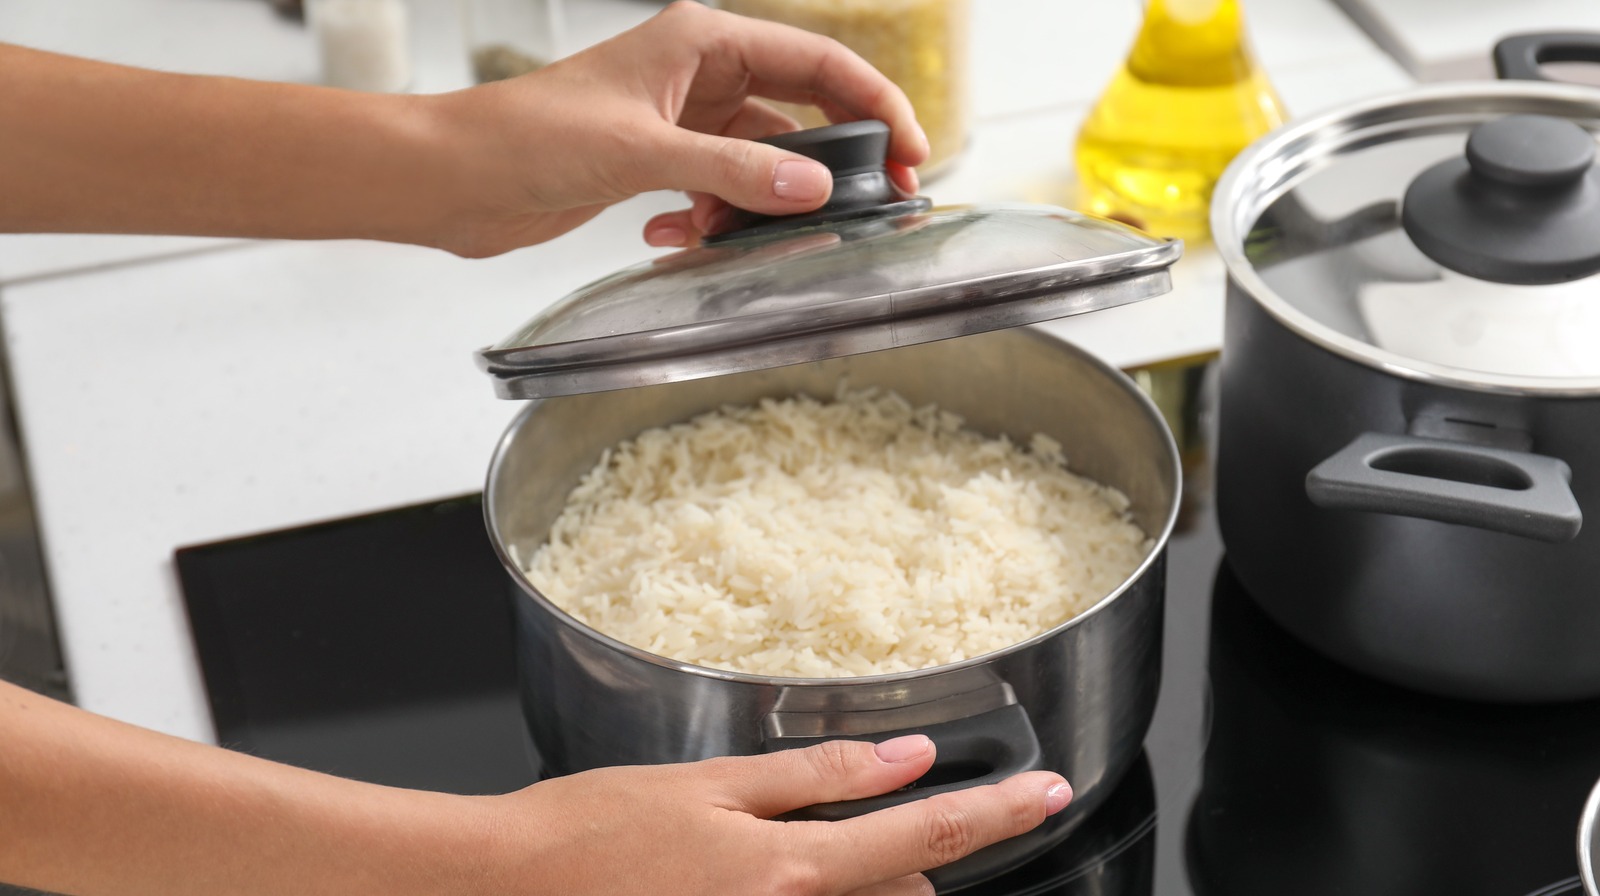 https://www.thedailymeal.com/img/gallery/why-your-pot-lid-is-so-vital-for-making-perfectly-cooked-rice/l-intro-1678294955.jpg